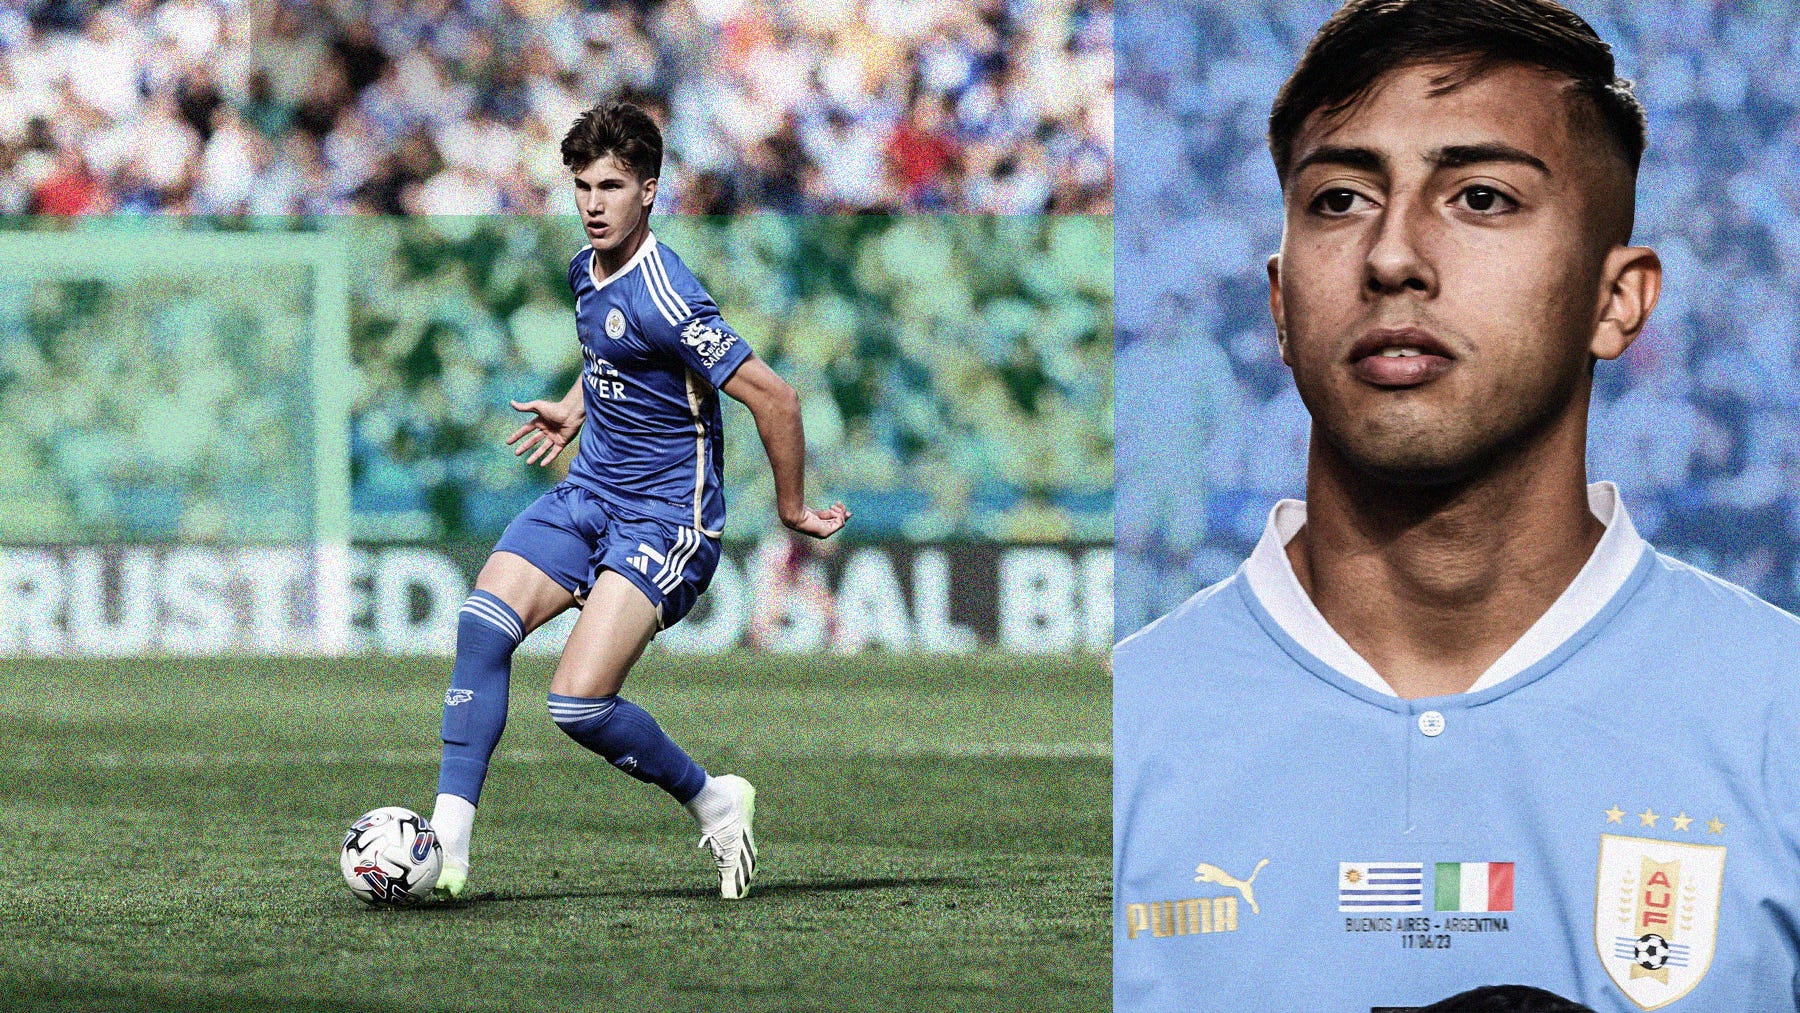 A composite image featuring two photos: on the left, Cesare Casadei passing the ball while playing for Leicester City; on the right, a close-up of Uruguay captain Fabricio Díaz